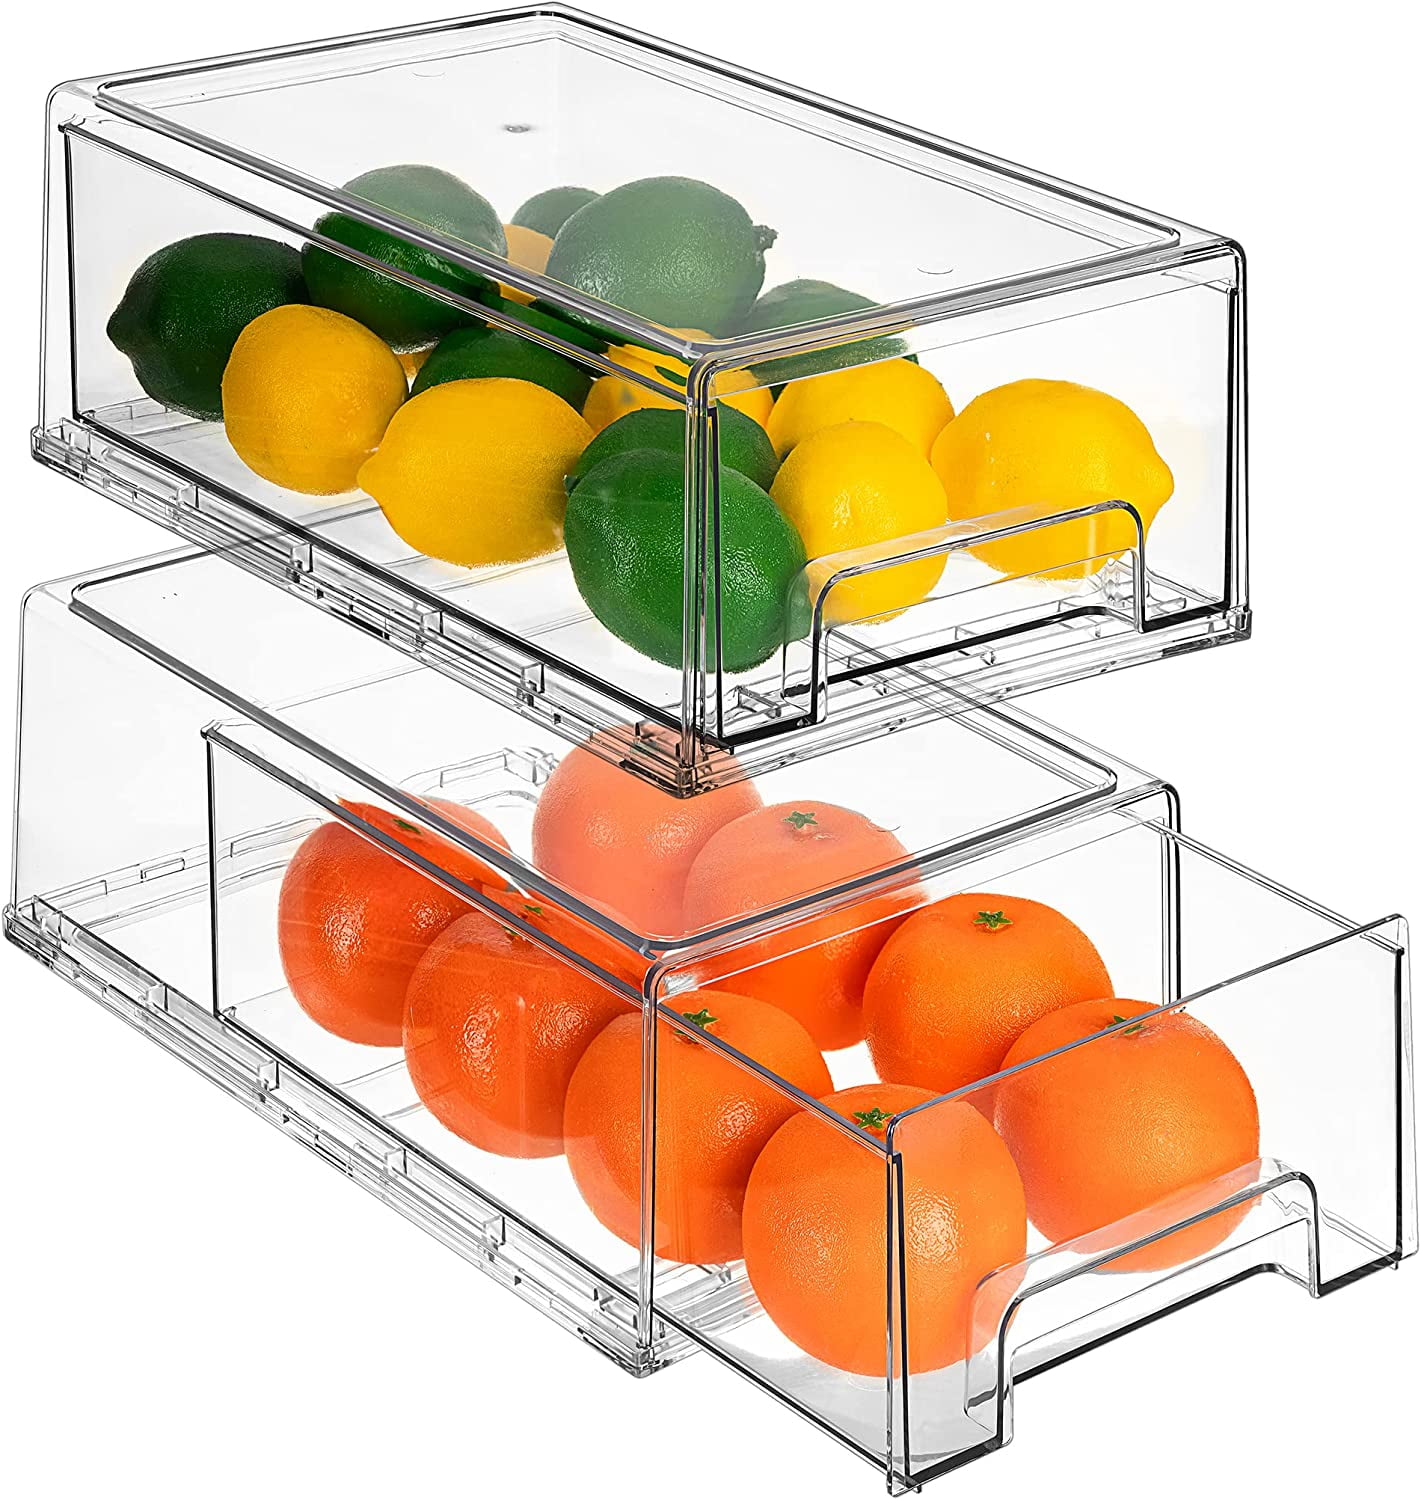 Sorbus Cleaning Supplies Organizer - Clear Containers for Organizing Cleaning Supplies Under The Sink - Clear Bins for Organizing Kitchen and